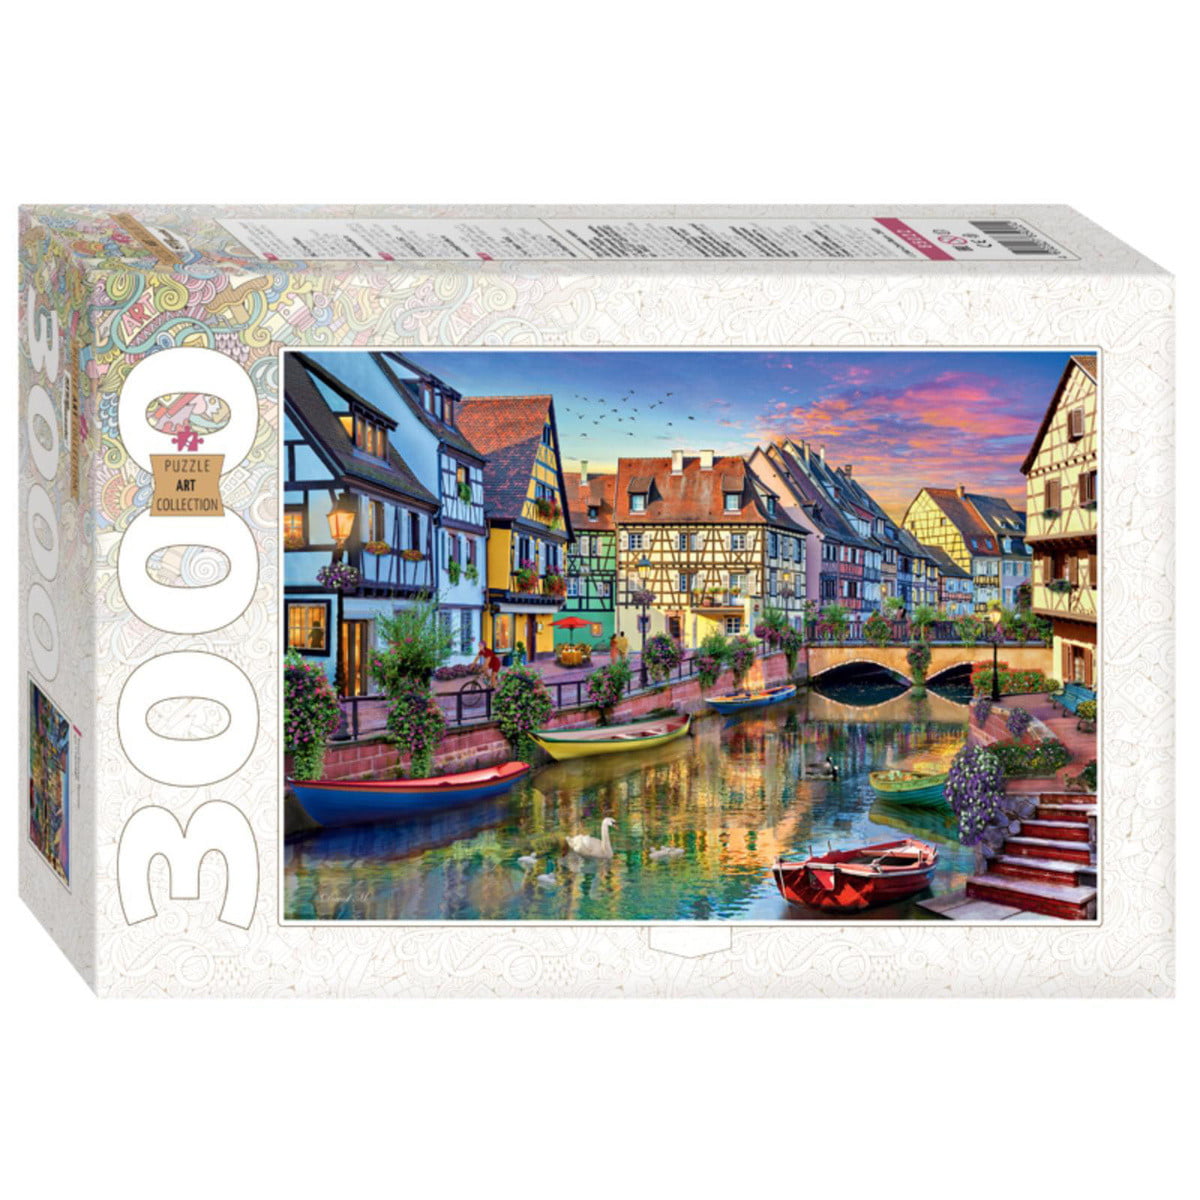 3000 Pieces Jigsaw Puzzles,3000 Piece for Adults Kids Puzzle Fun Challenging Puzzle Game Collection Toy Gift Home Art Decor Romantic Black cat-3000Pieces